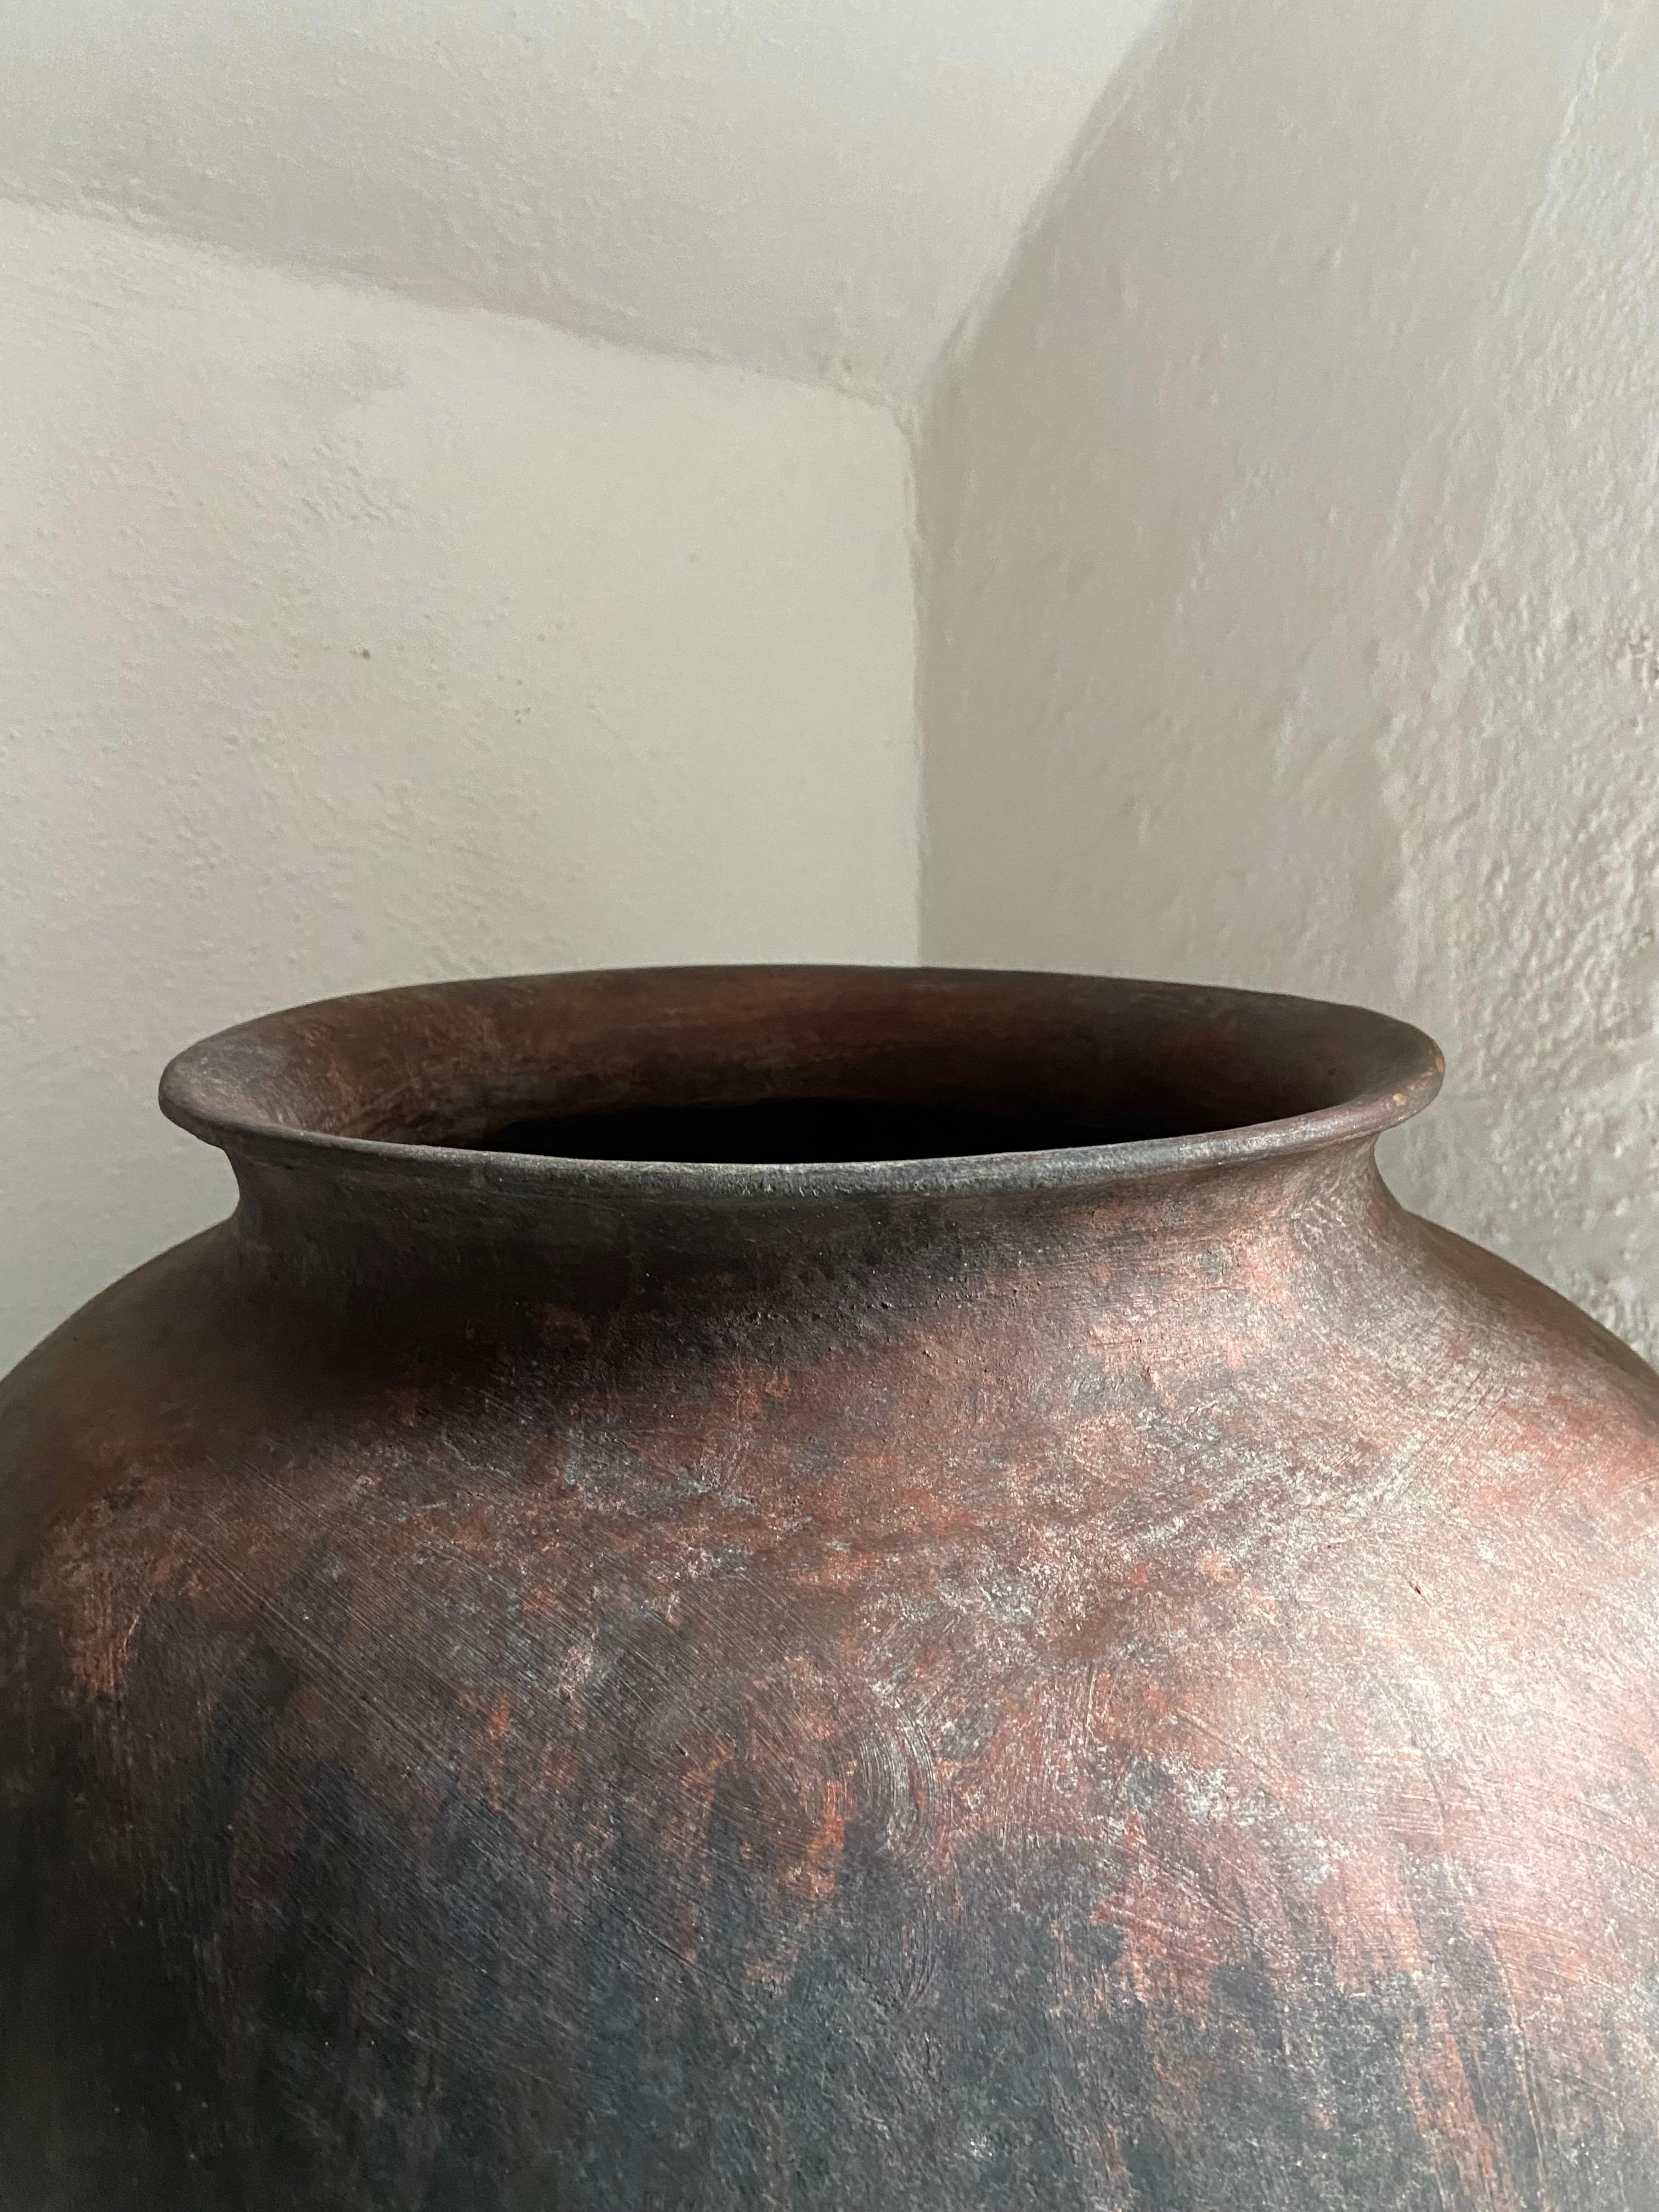 Fired Mid-20th Century Ceramic Pot from Mexico